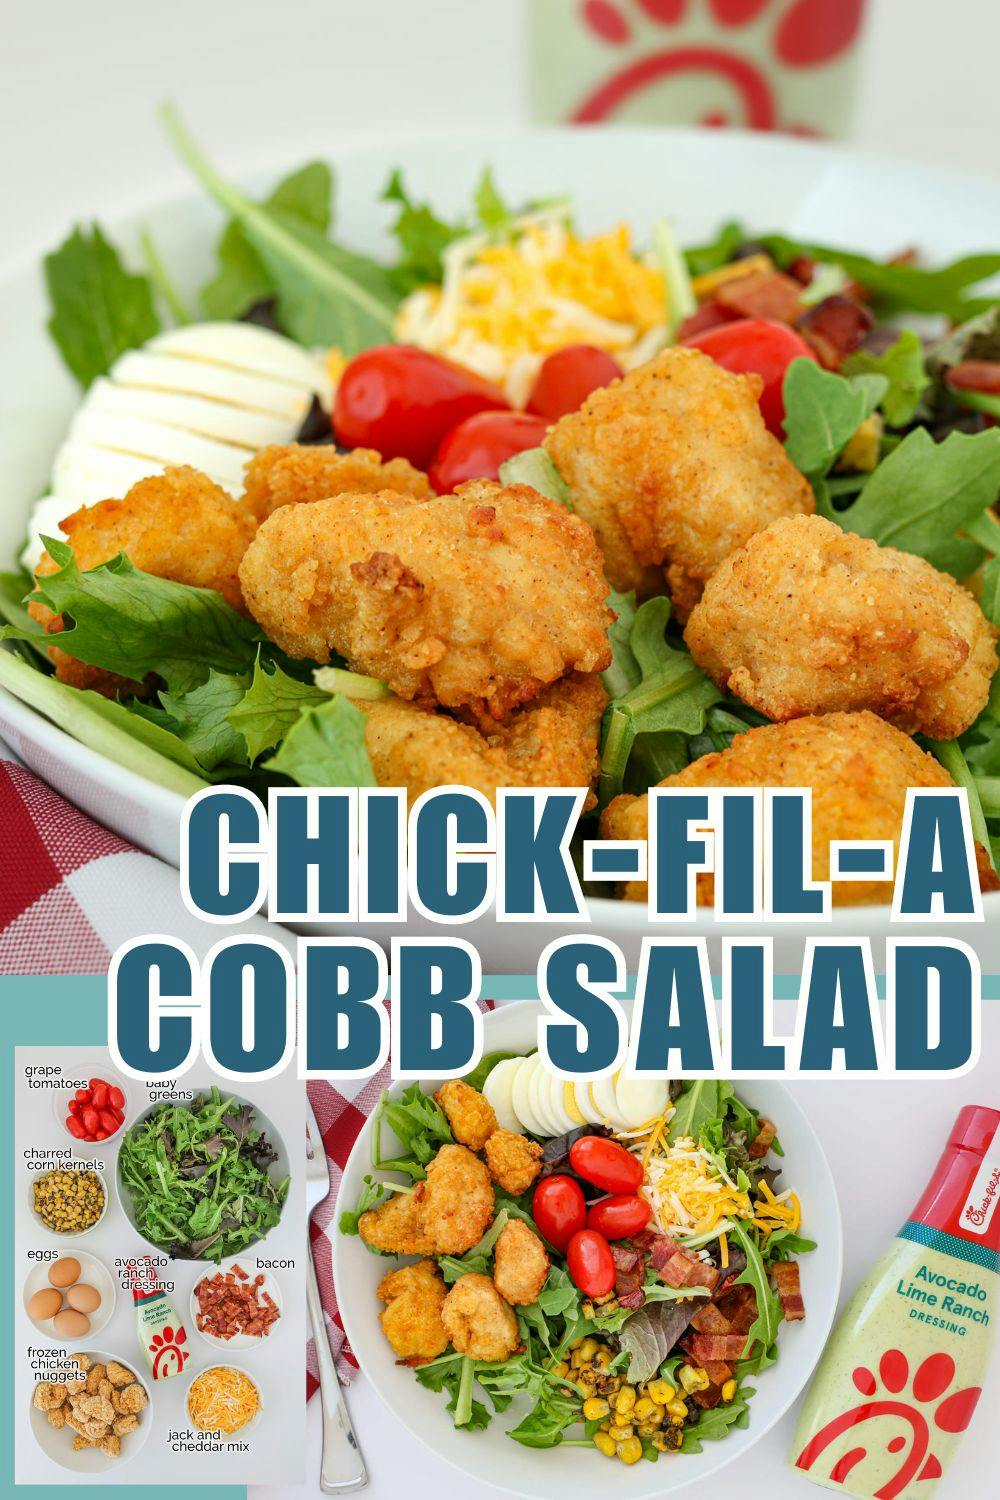 chick-fil-a cobb salad with a red check napkin and bottle of dressing in the background.